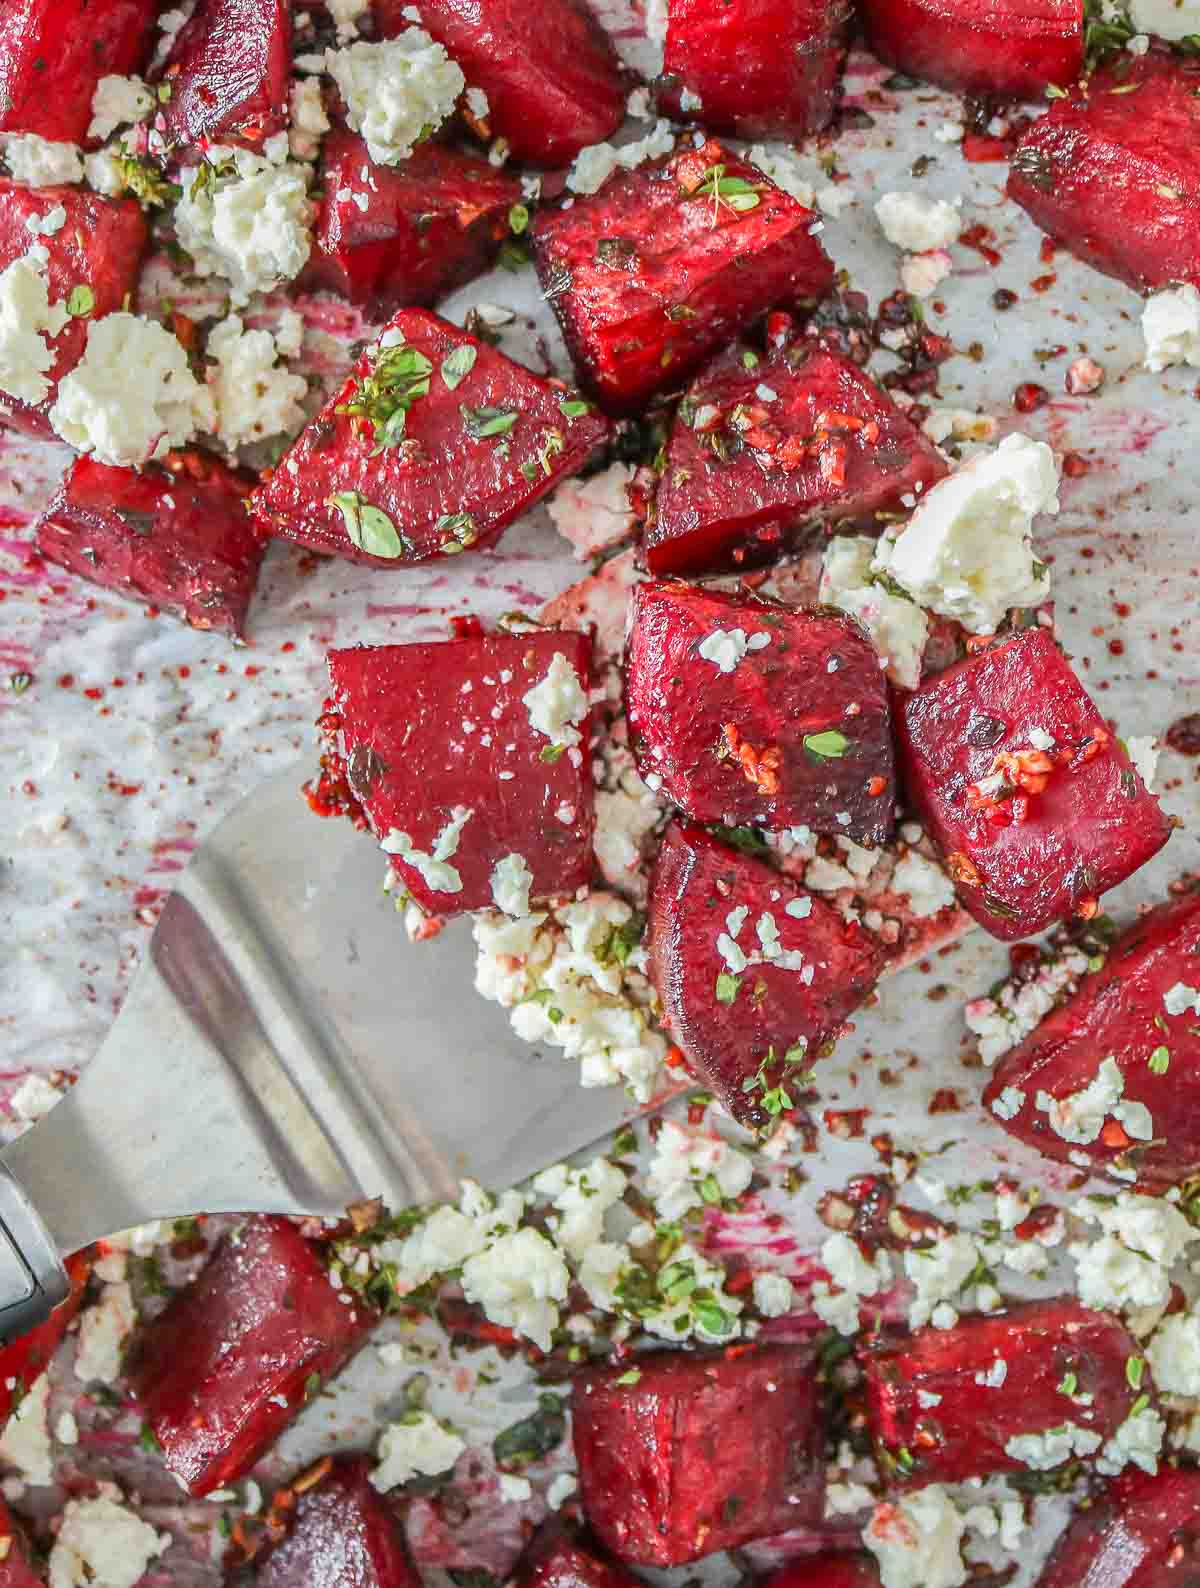 Spatula serving roasted beets with feta from a sheet pan.